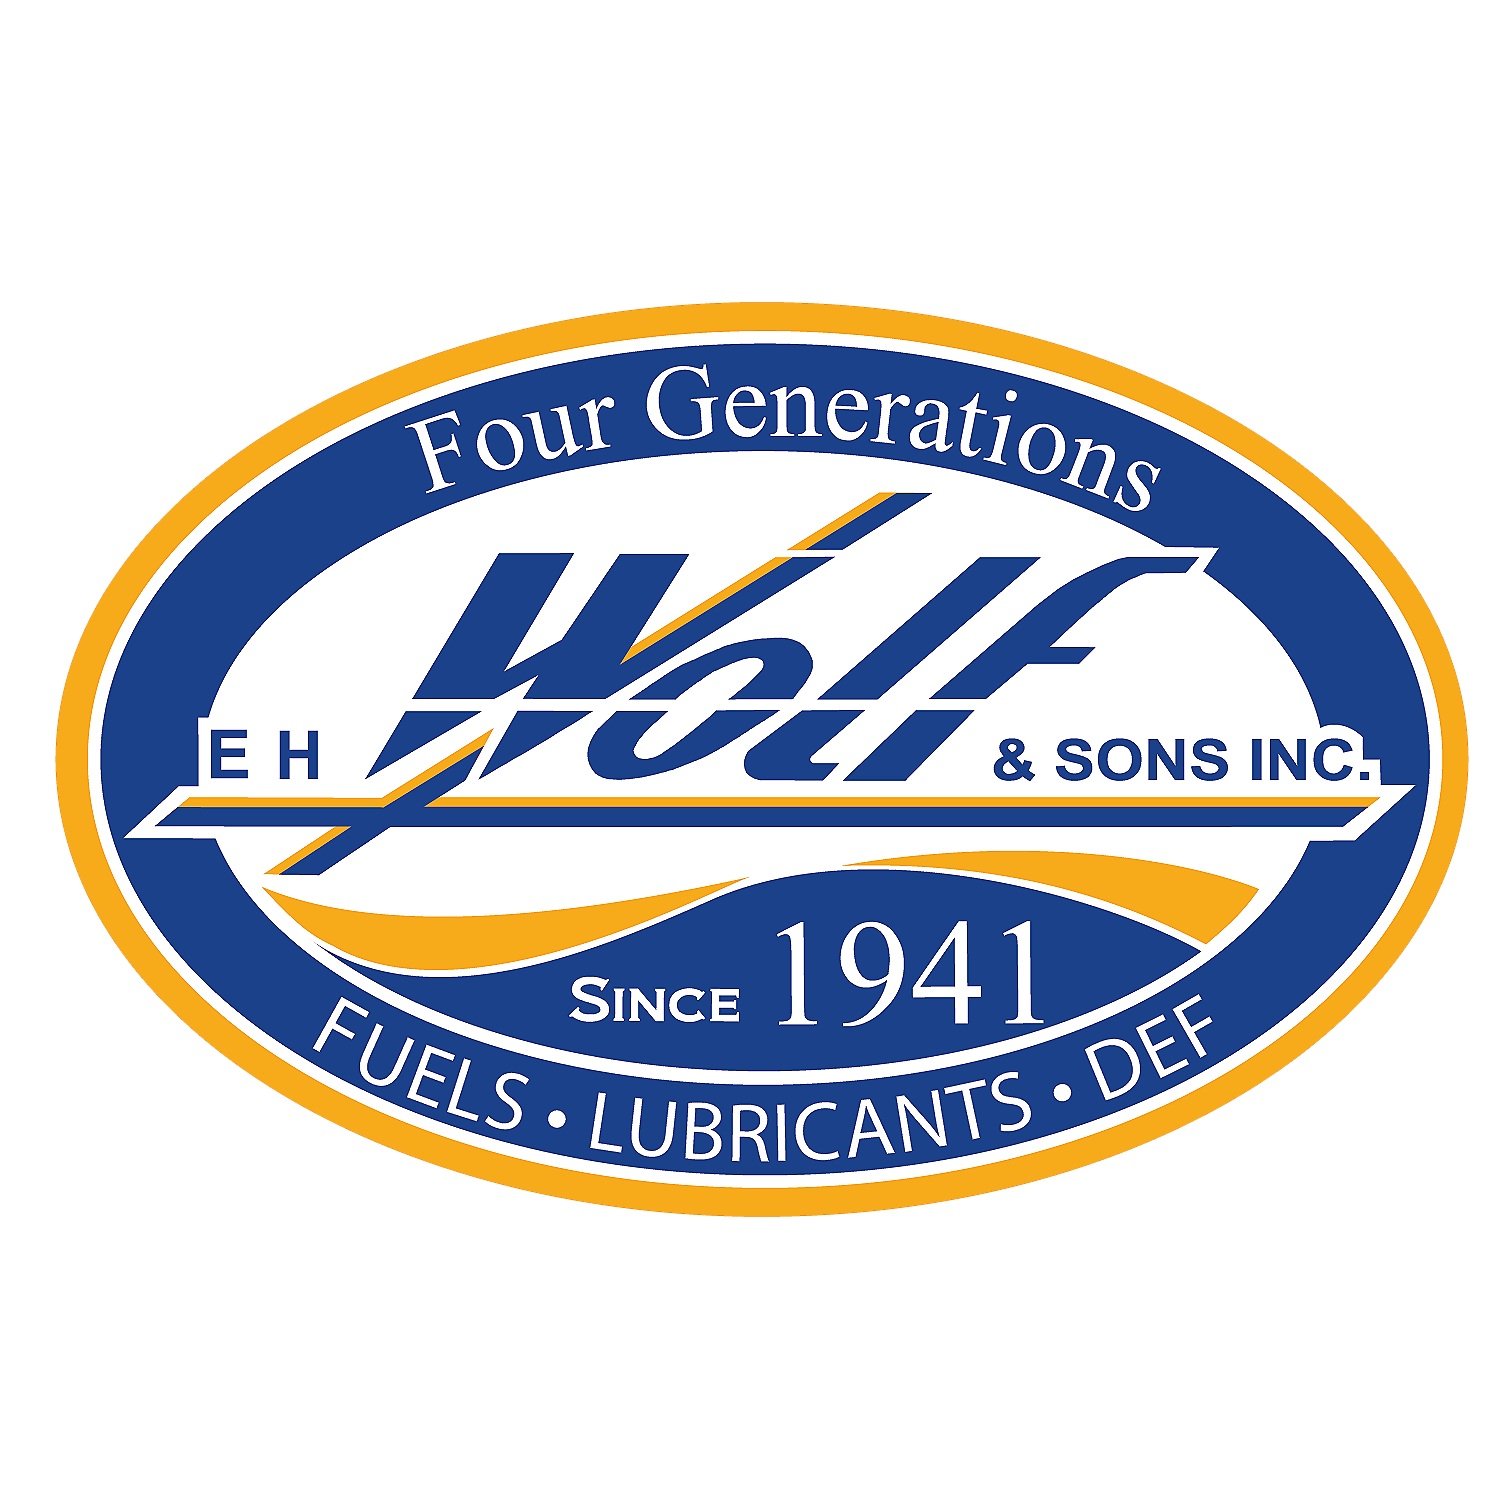 E.H. Wolf & Sons, Inc | Fuel & Lubrication Experts